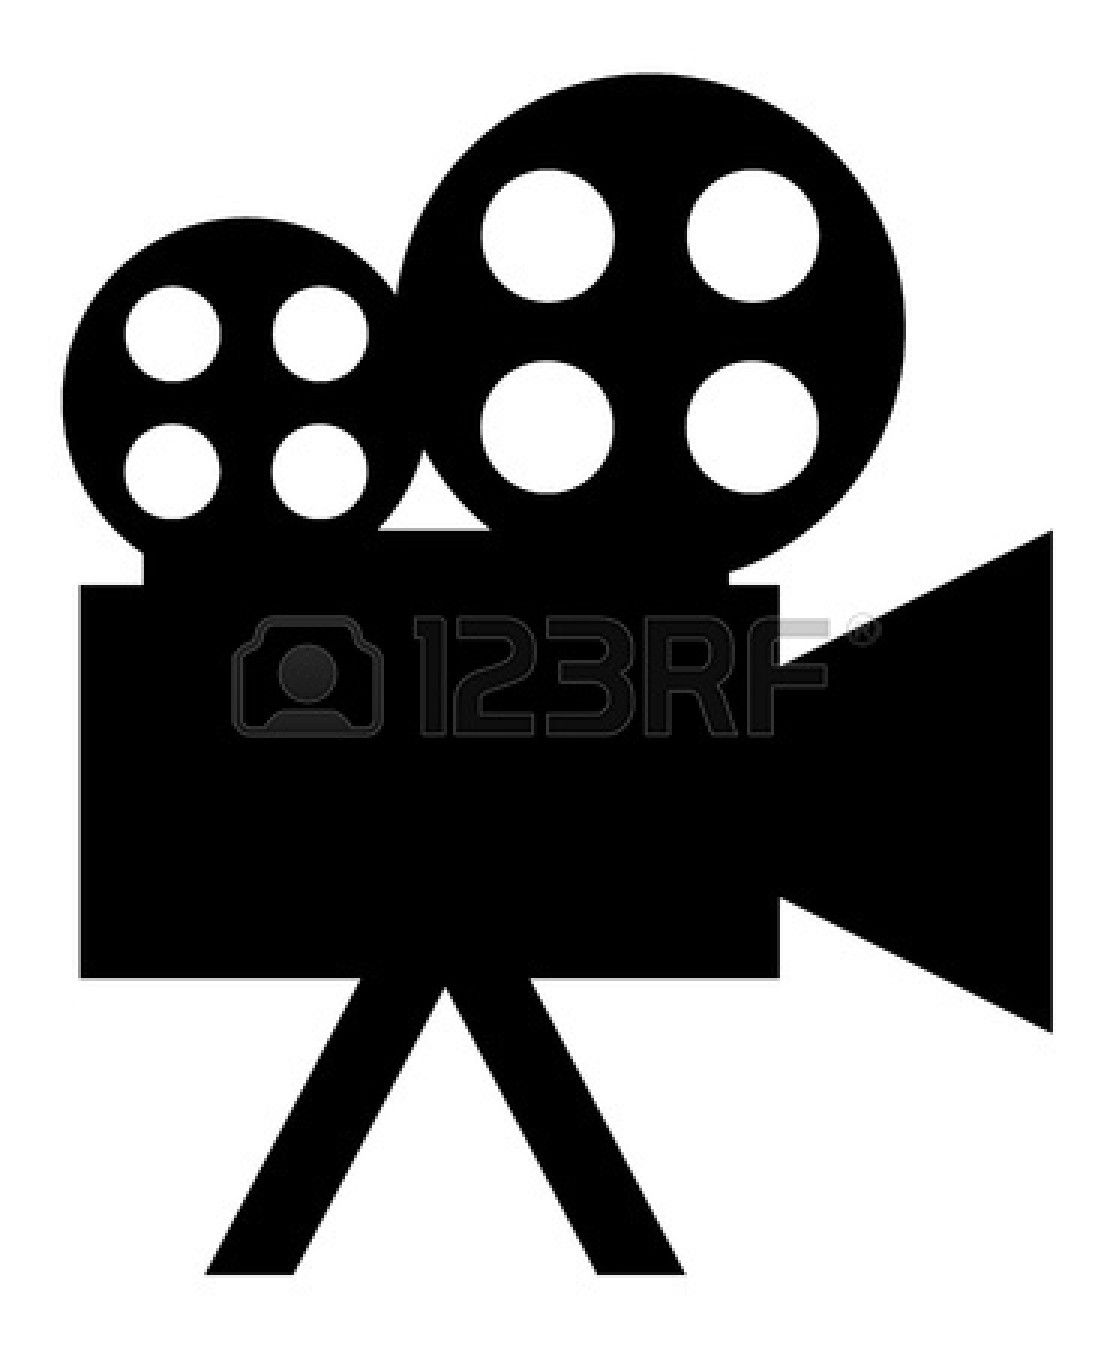 movie clipart projecter